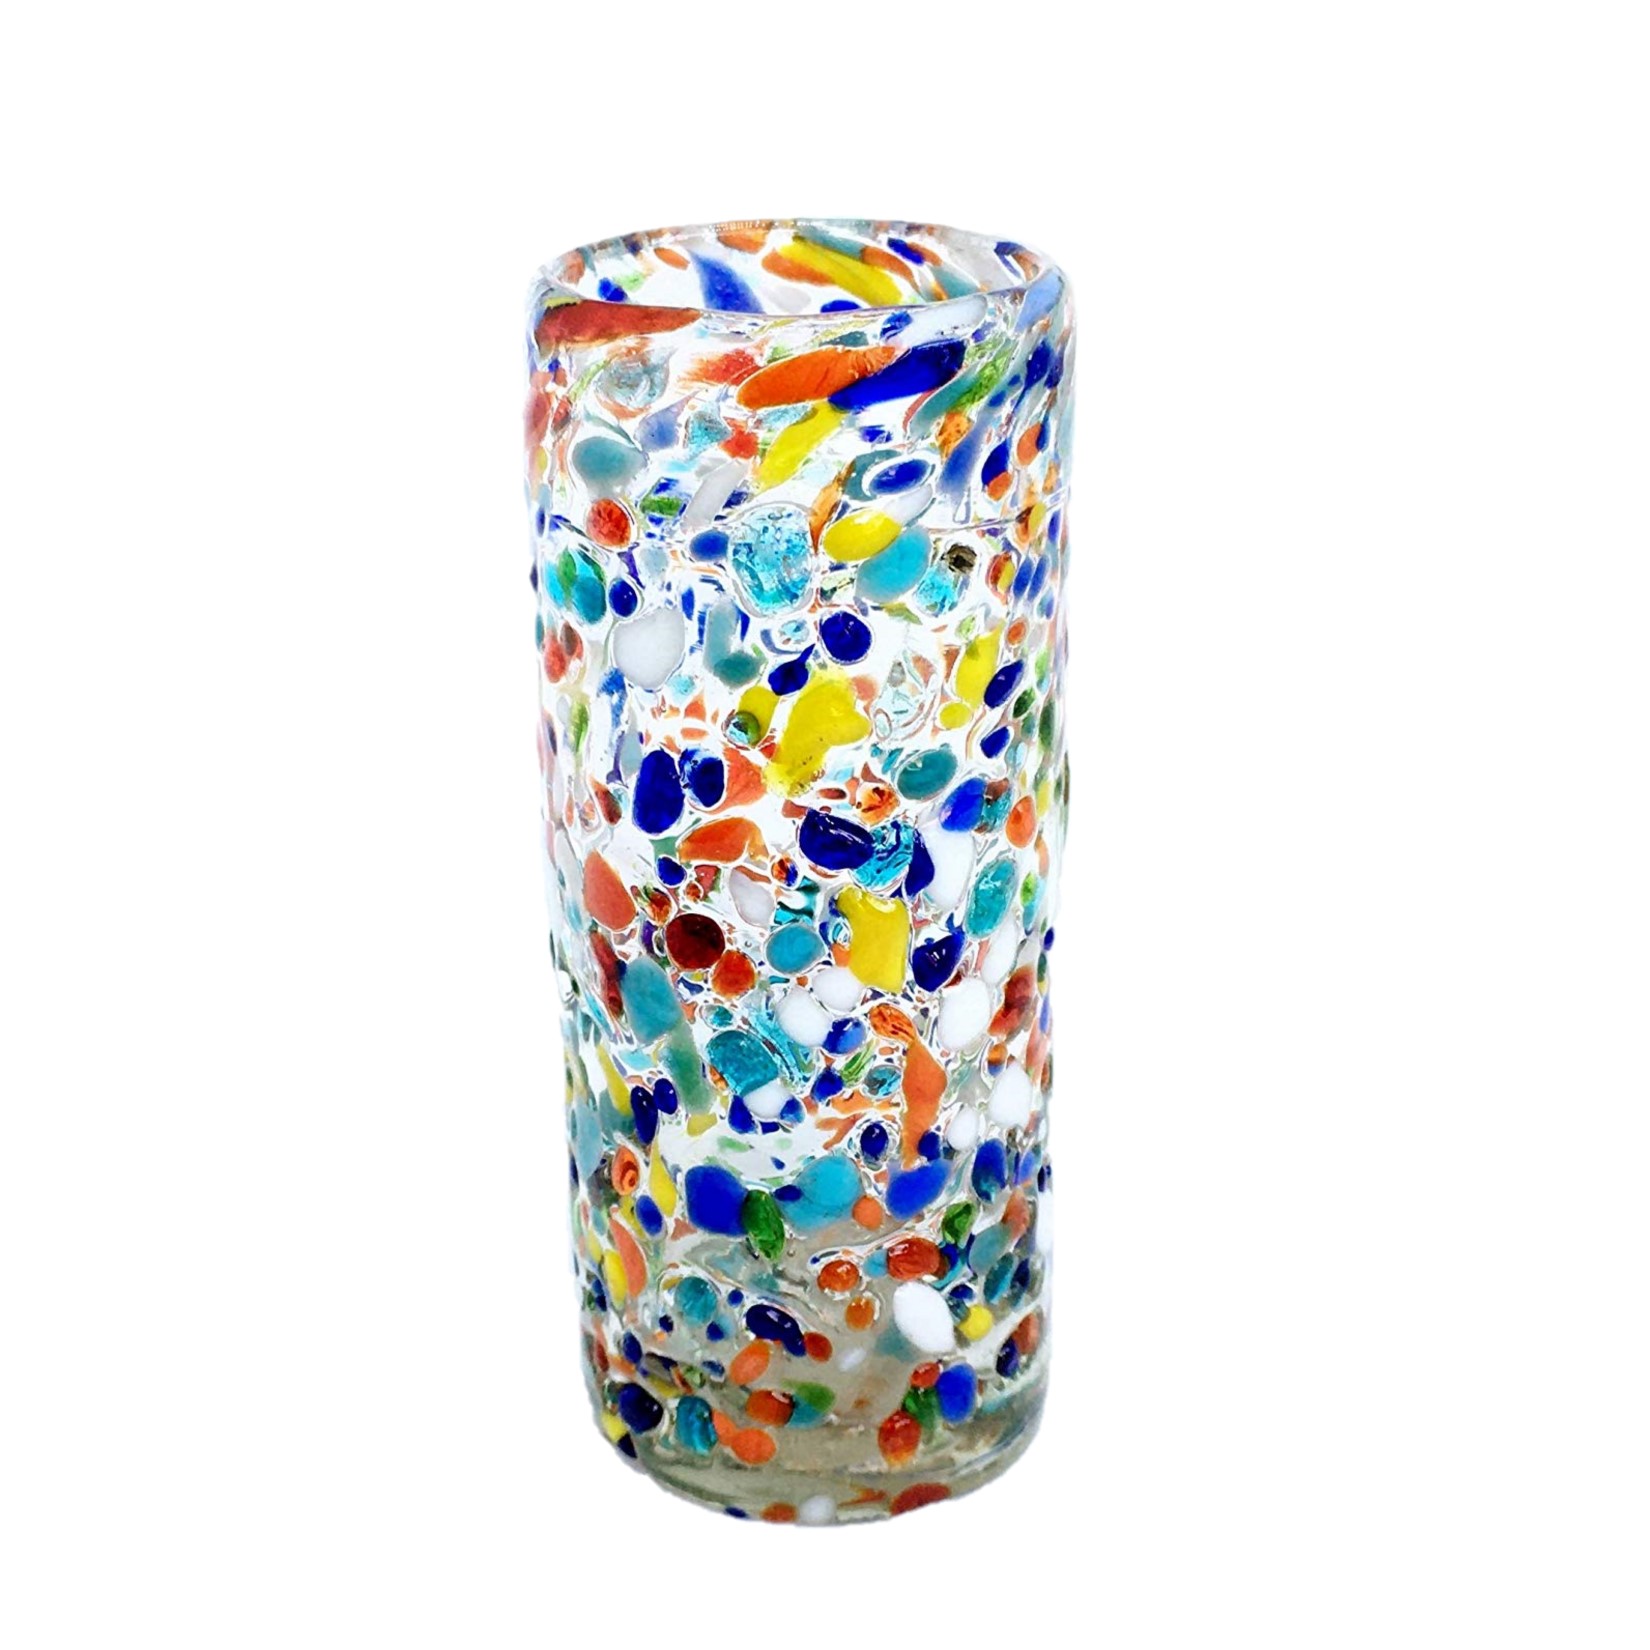 Sale Items / Confetti Rocks 2 oz Tequila Shot Glasses (set of 6) / Sip your favorite Tequila or Mezcal with these iconic Confetti Rocks shot glasses, which are a must-have of any bar. Crafted one by one by skilled artisans in Tonala, Mexico, each glass is different from the next making them unique works of art. They feature our colorful Confetti rocks design with small colored-glass rounded cristals embedded in clear glass that give them a nice feeling and grip. These shot glasses are festive and fun, making them a perfect gift for anyone. Get ready for your next fiesta!!